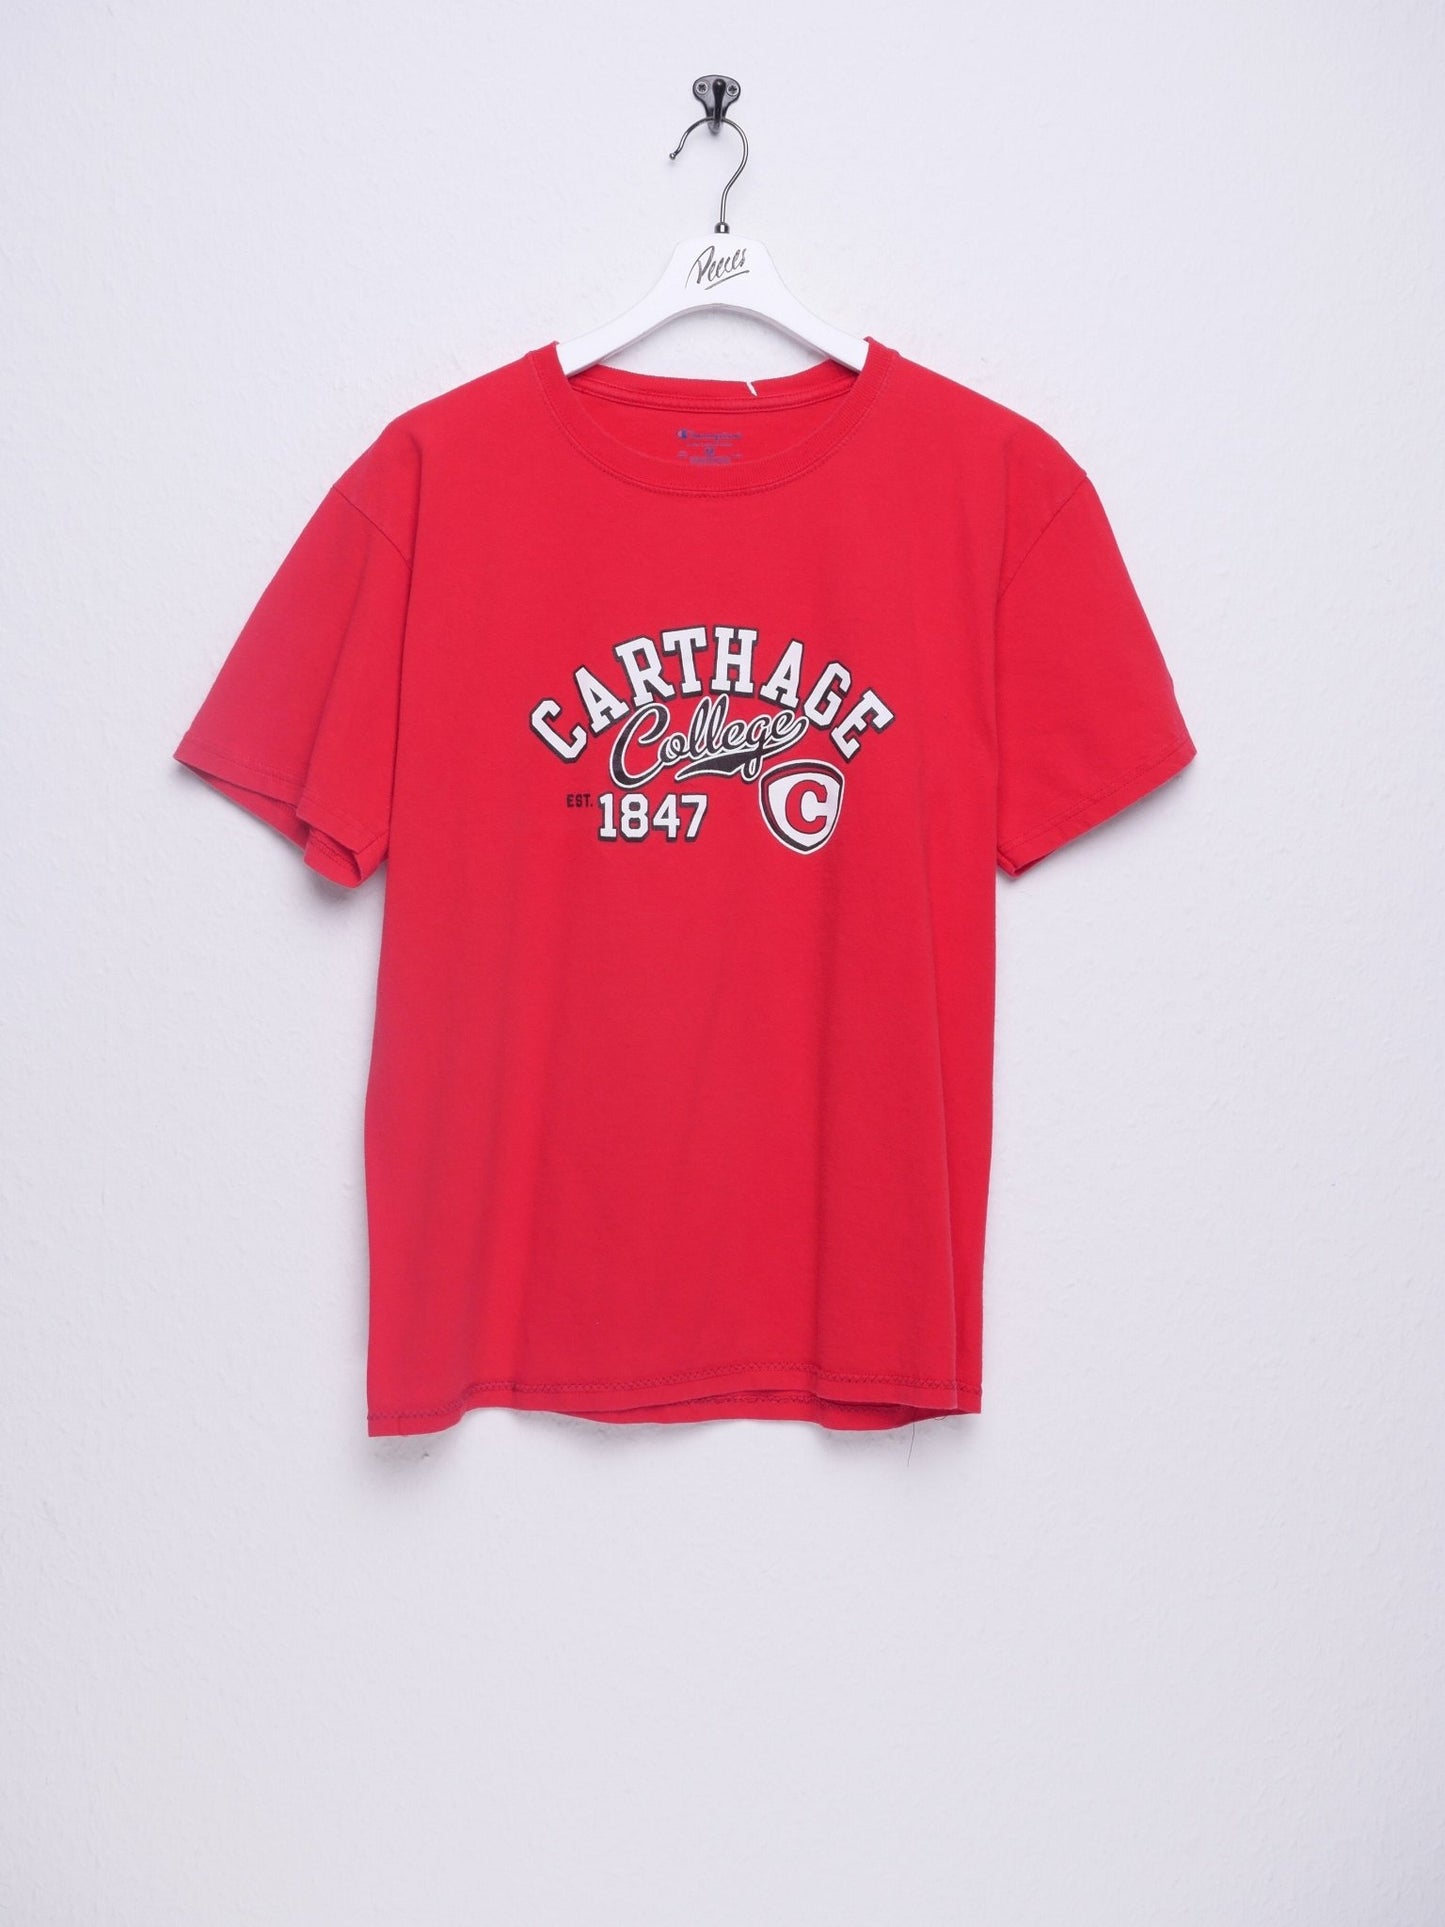 champion Carthage College embroidered Logo red Shirt - Peeces